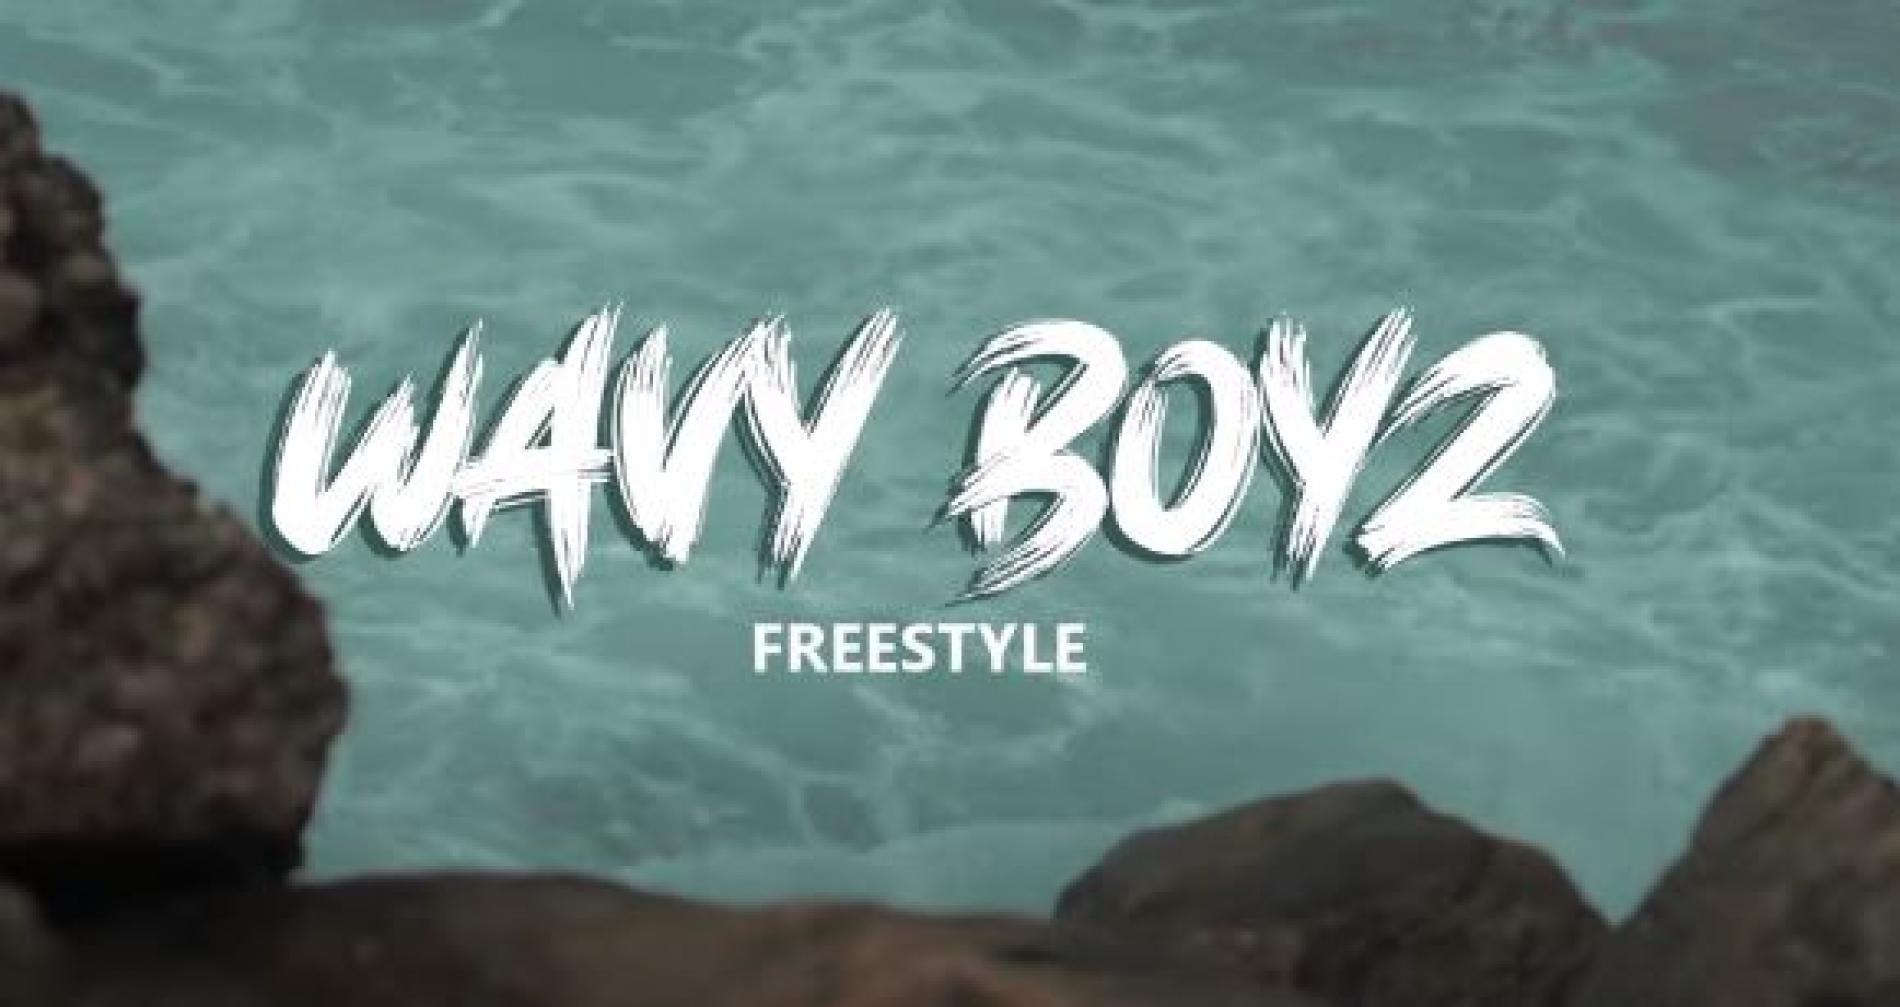 New Music : Dope Gang “WAVY BOYZ” [freestyle] ft Fyusion, Reezy & Teecee (Official Video)